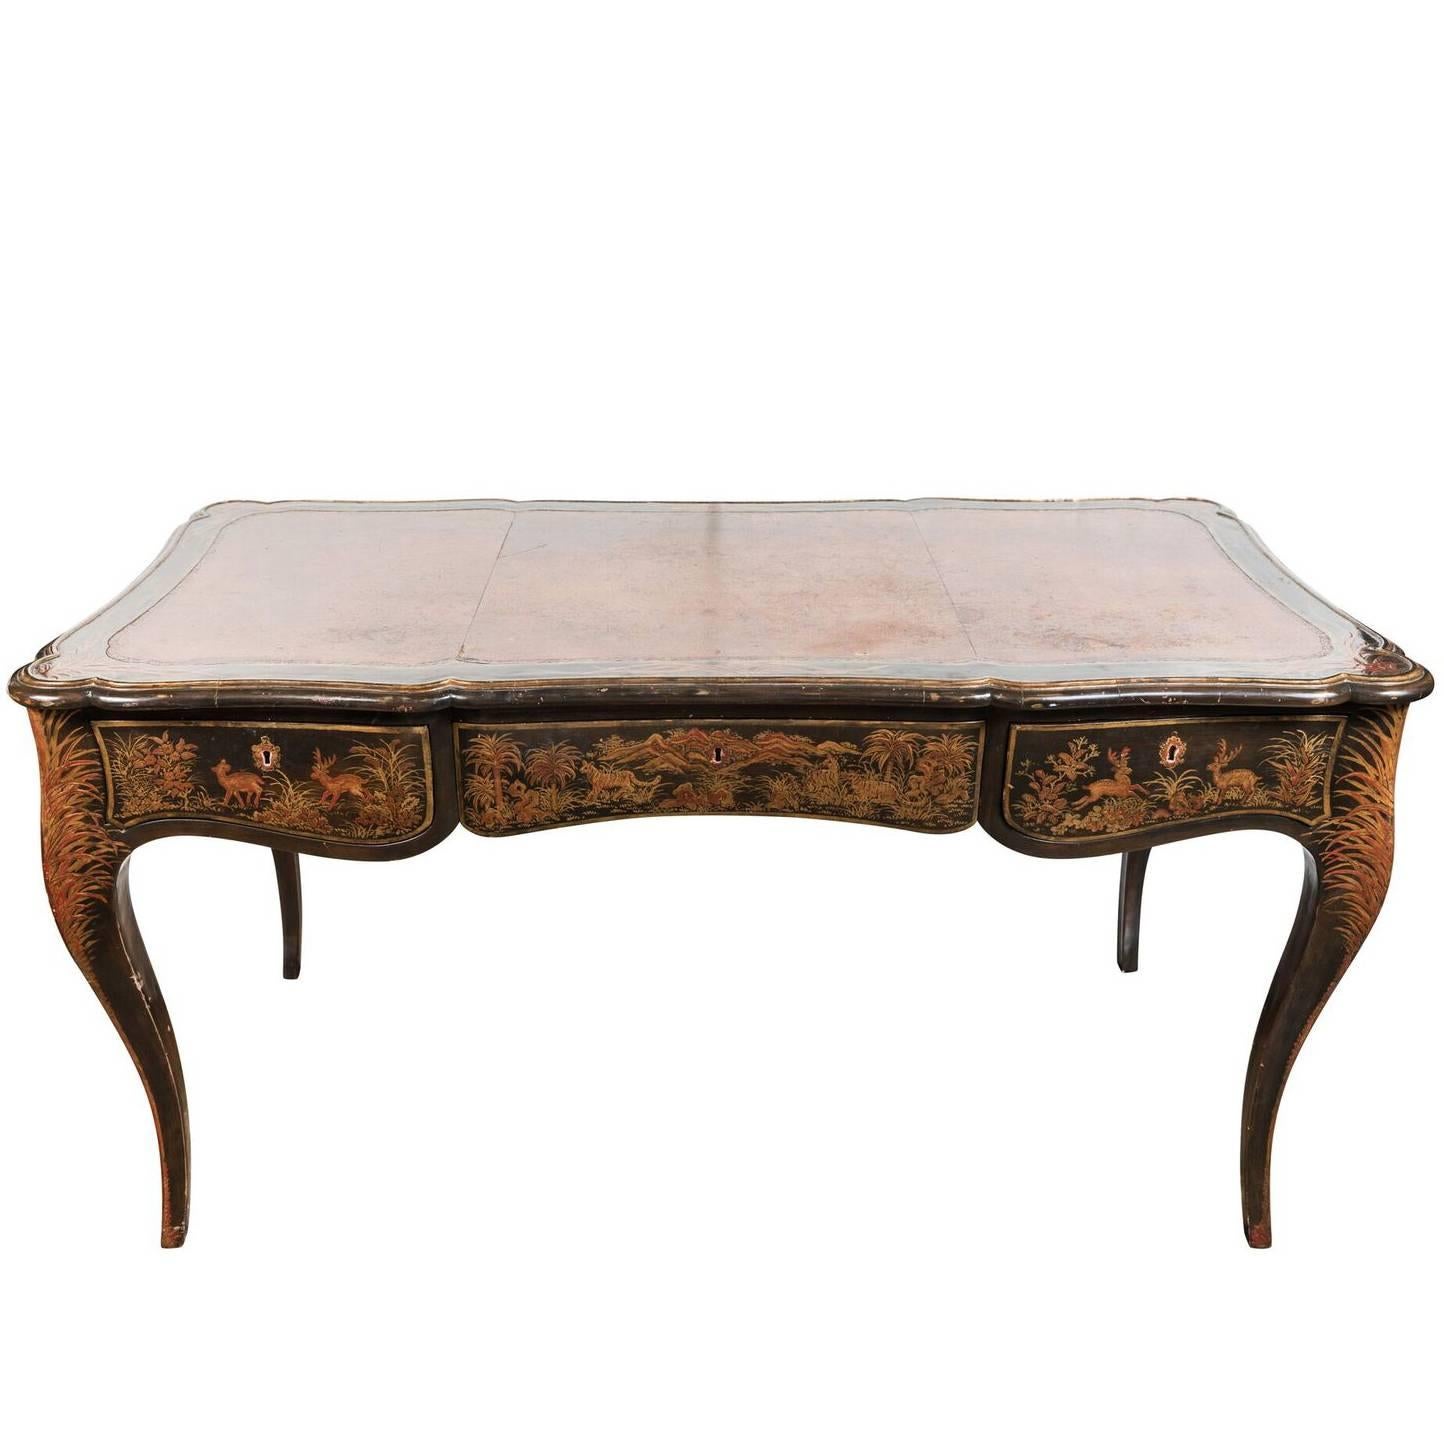 19th Century, Hand-Painted, Chinoiserie Desk